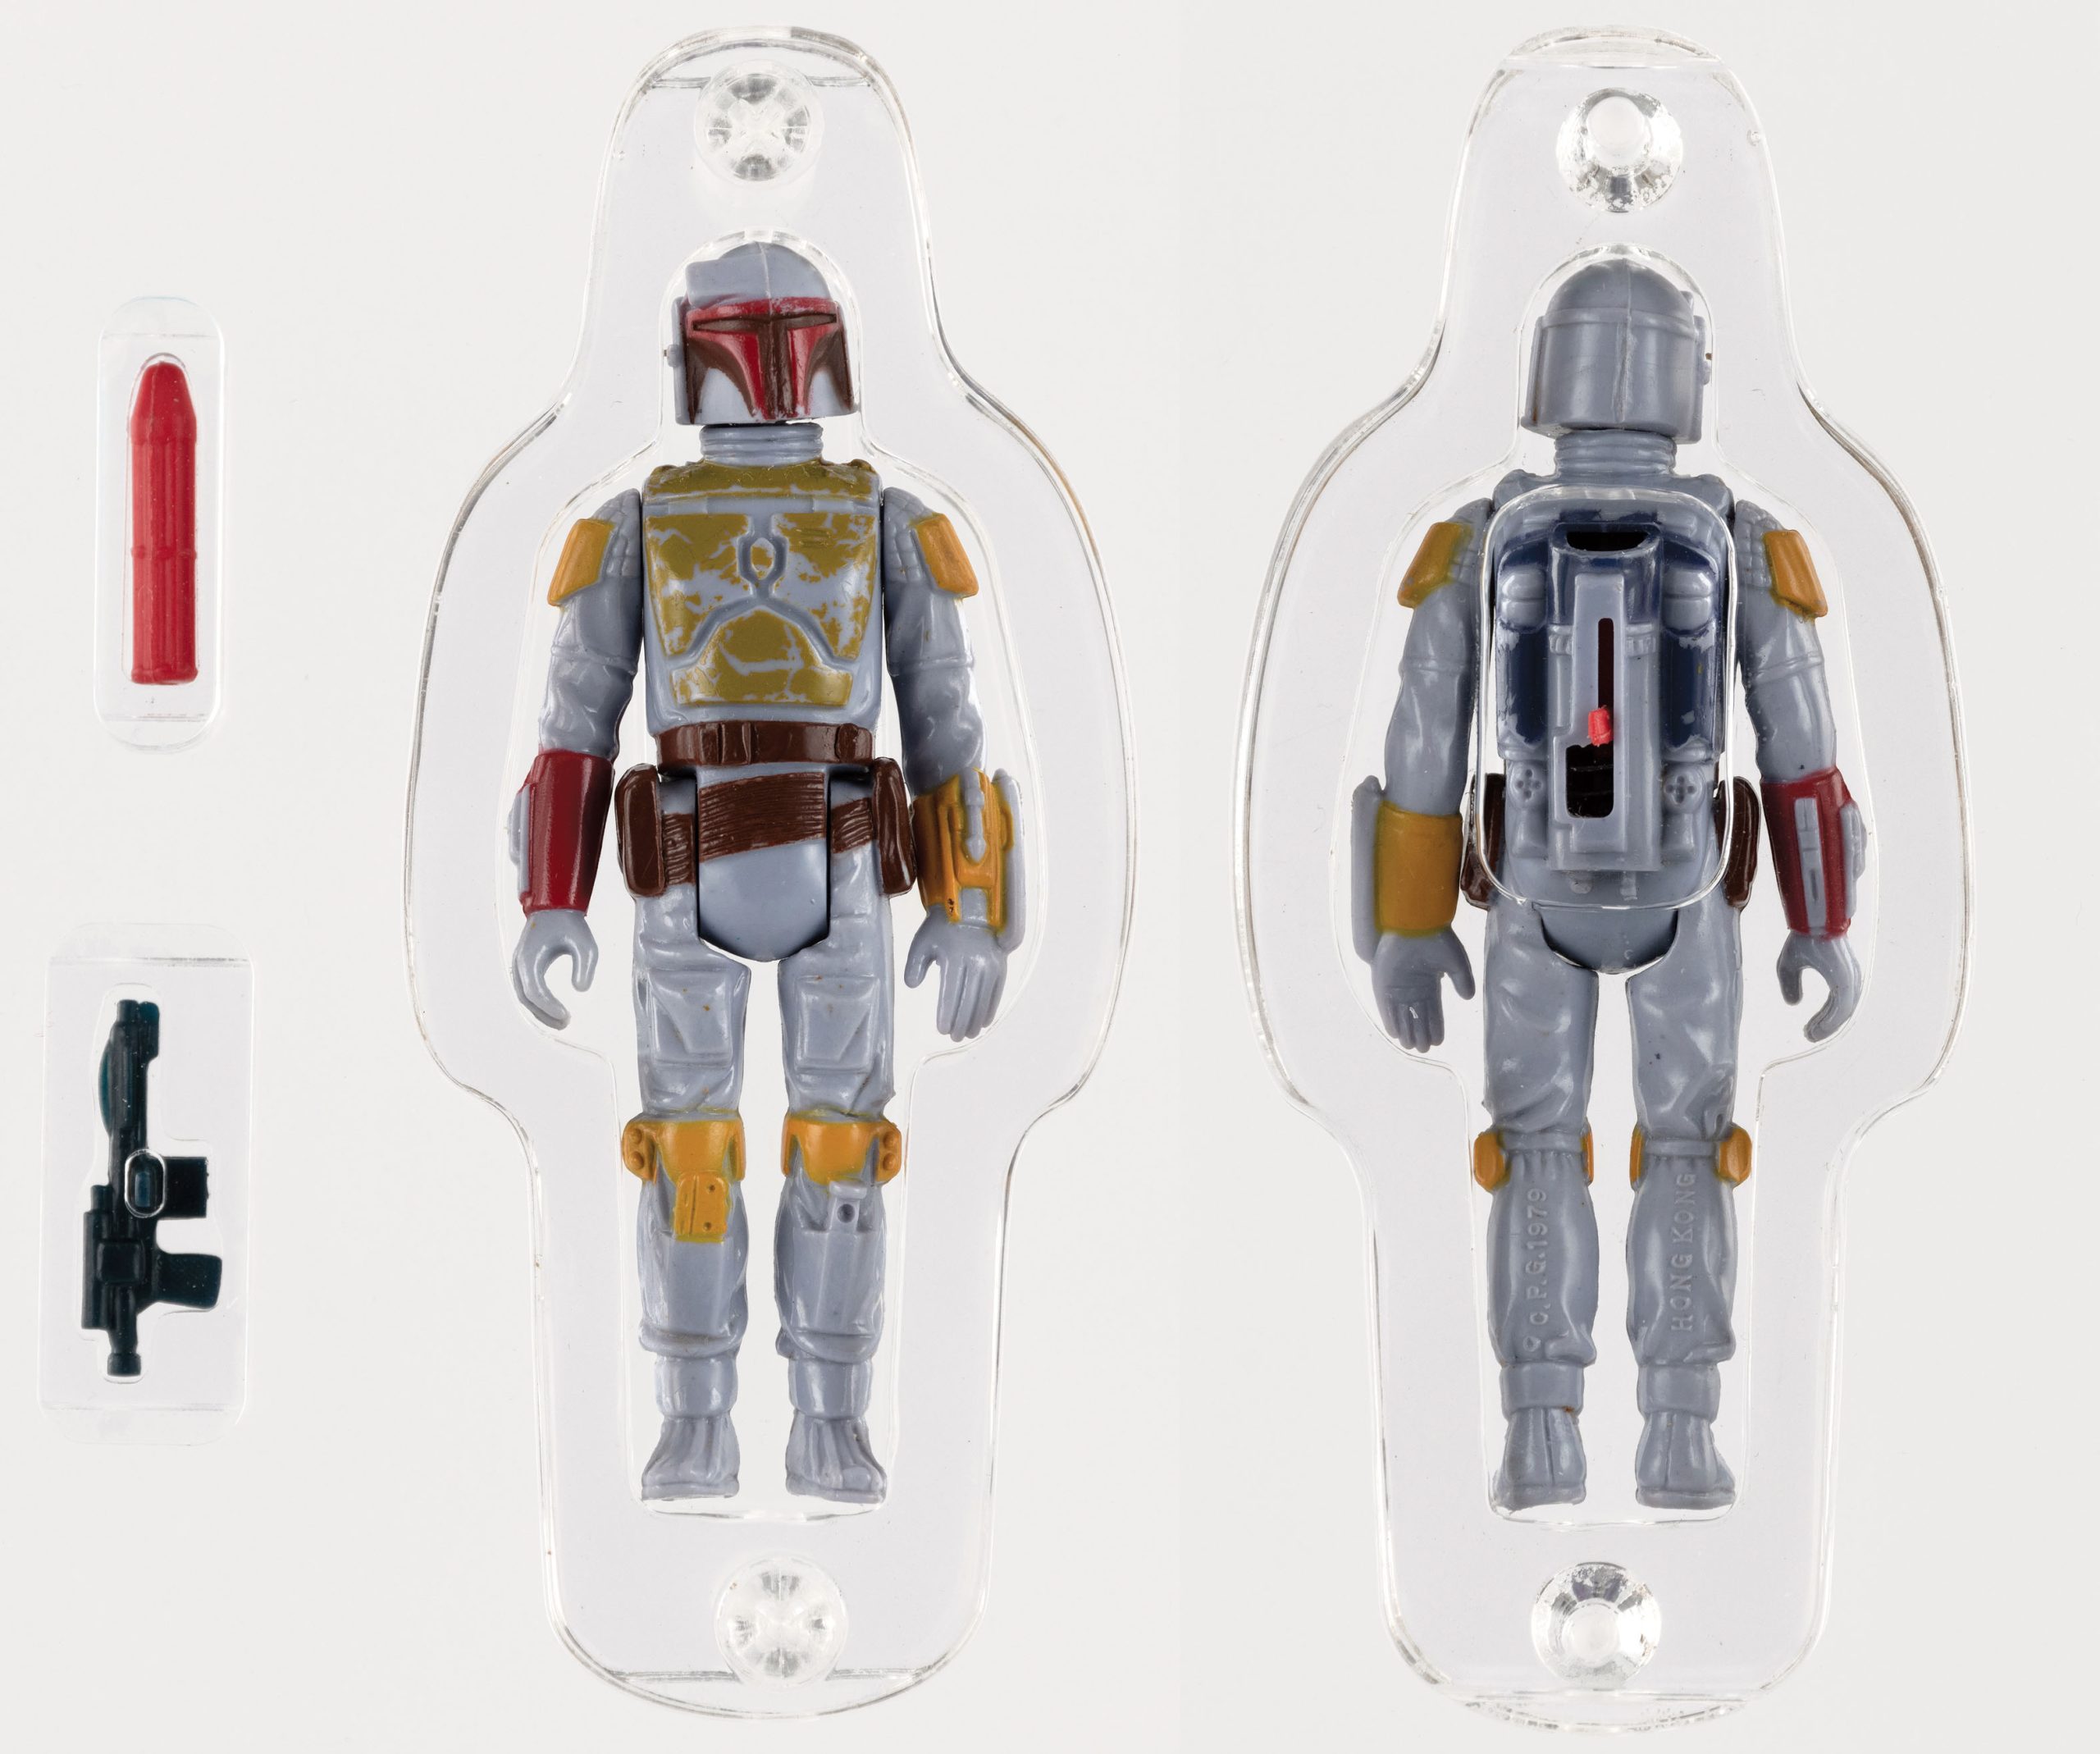 Hake’s: Star Wars prototype action figure sells for world-record price